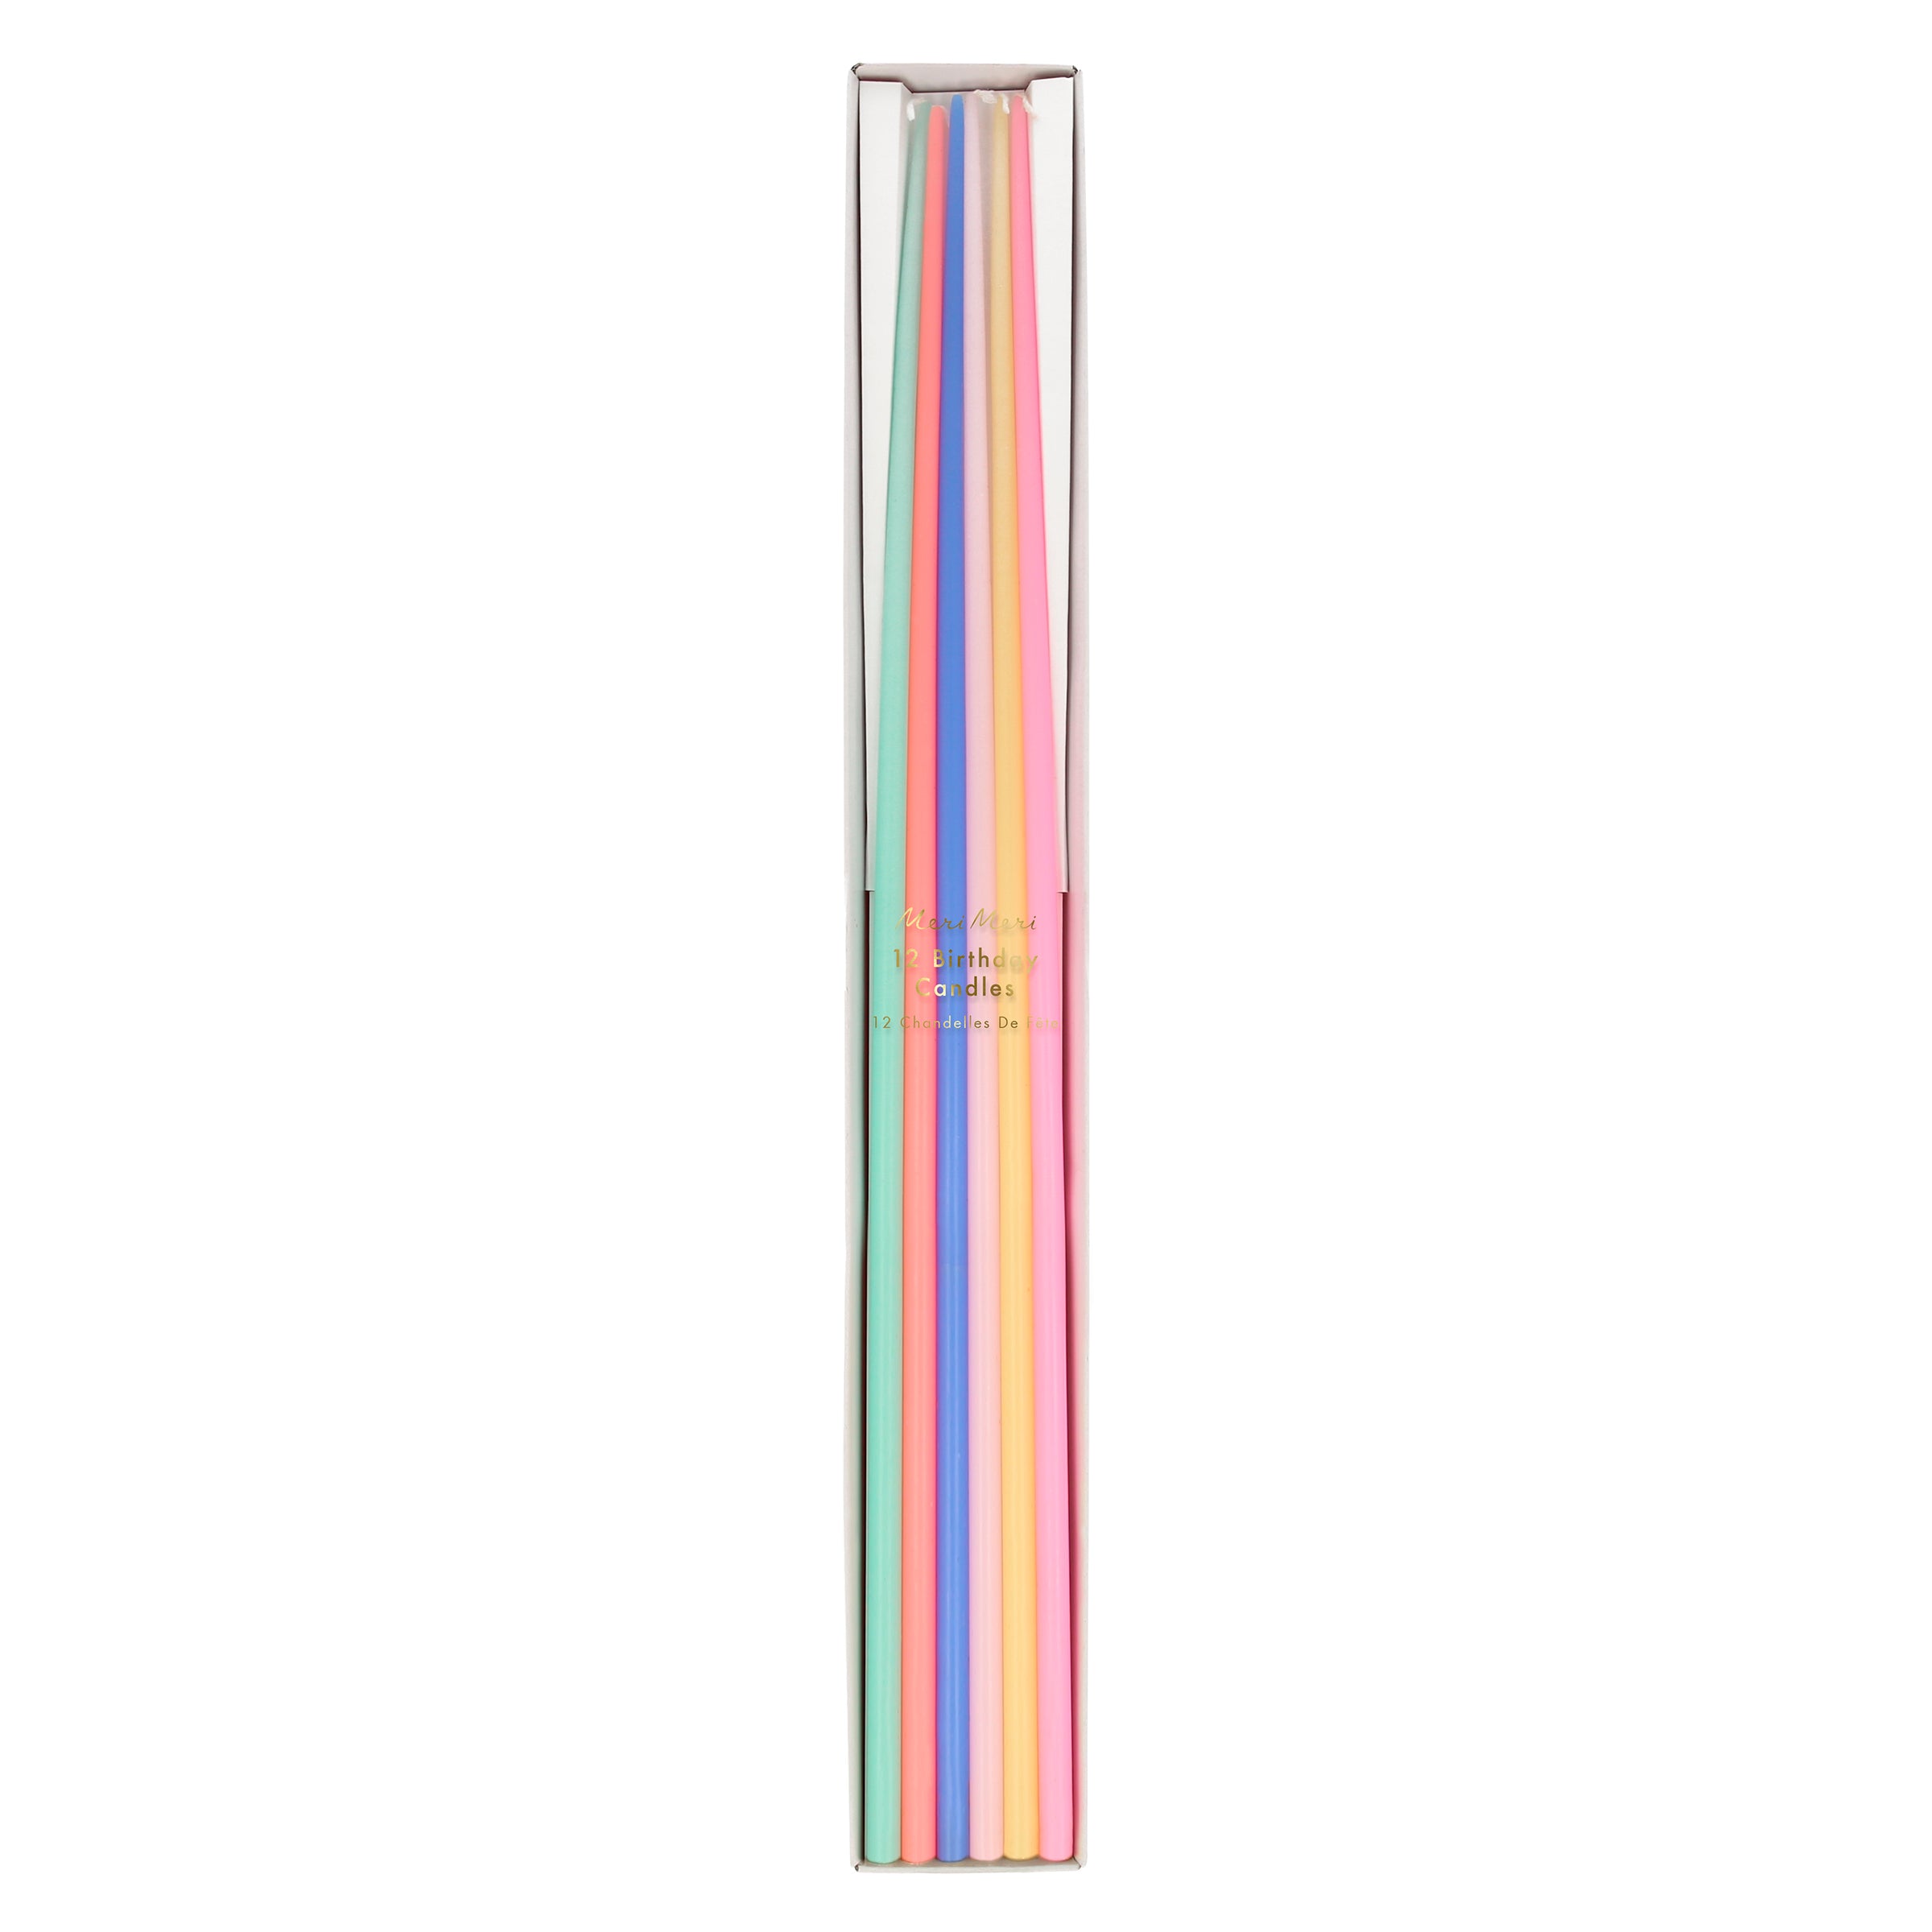 Our colorful candles, which are tall and tapered, are perfect as birthday cake candles or for any party theme.